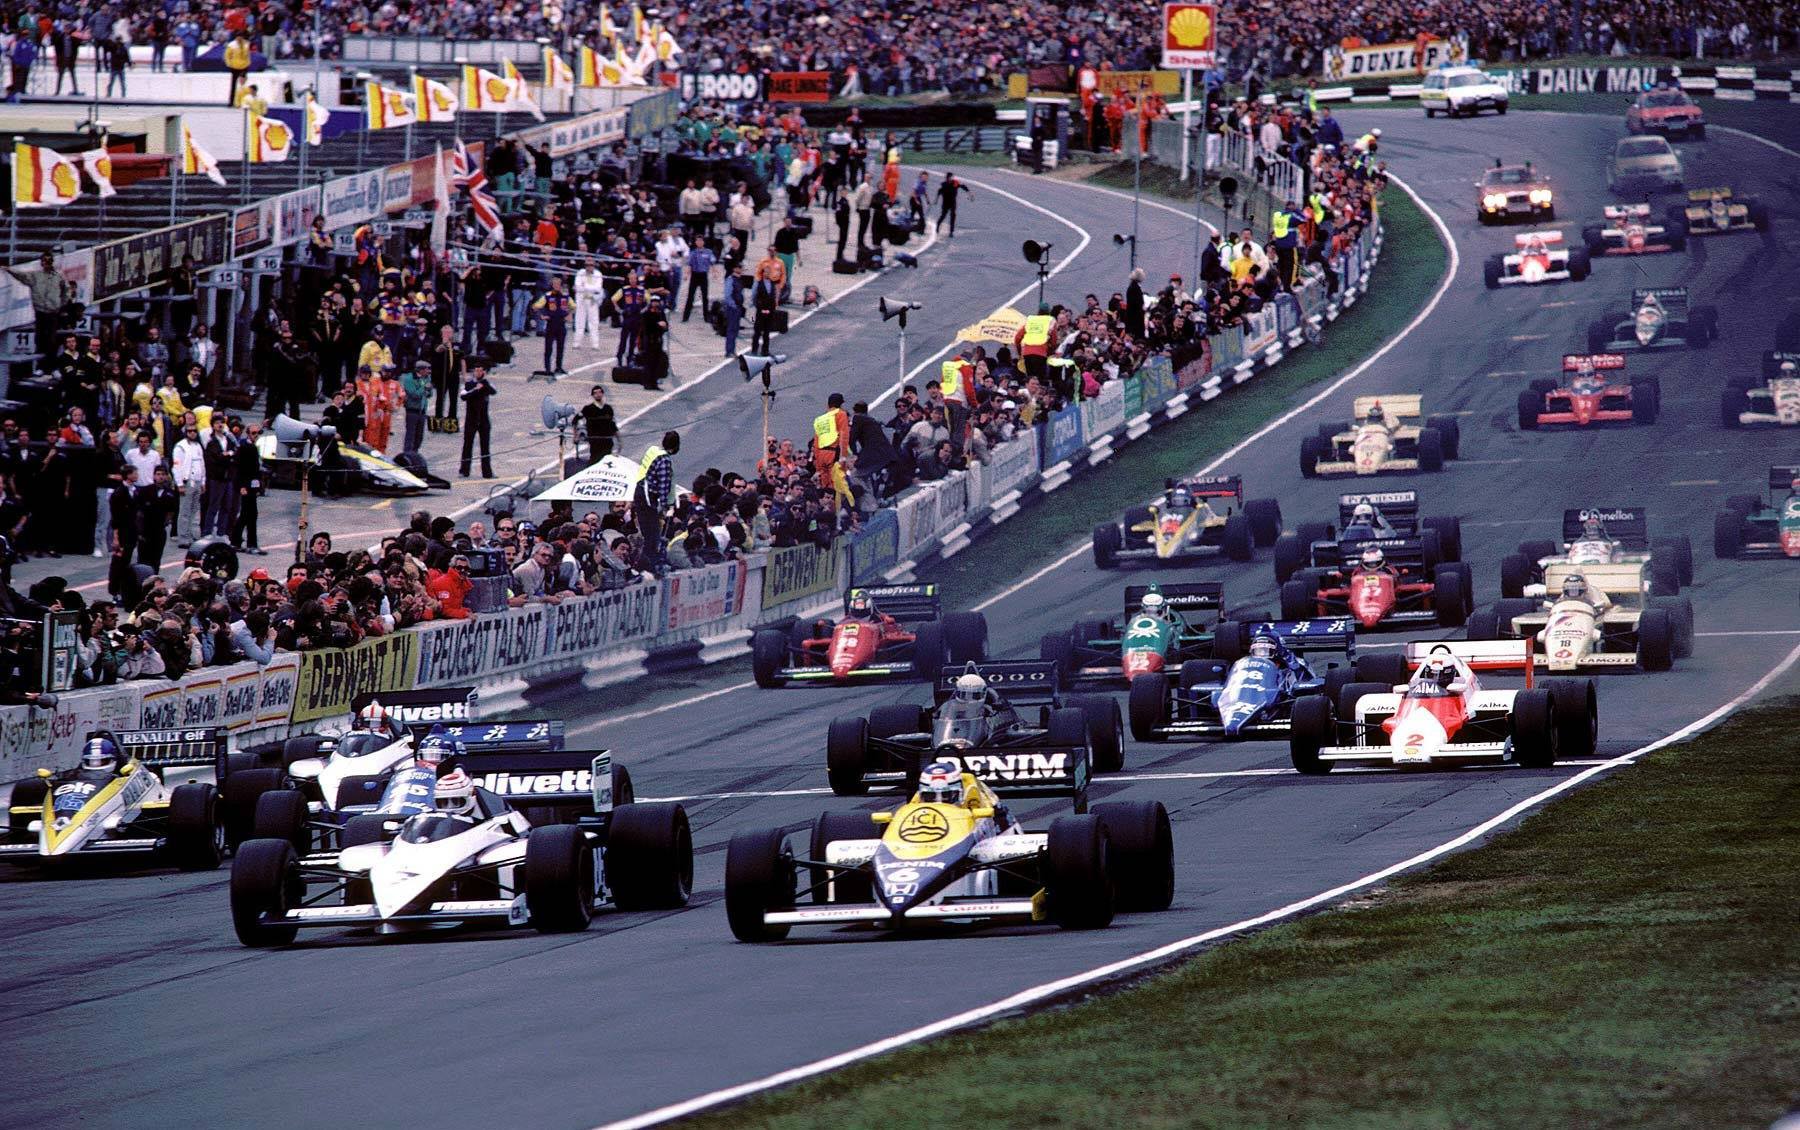 The start of the European Grand Prix at Brands Hatch on 06 October 1985.